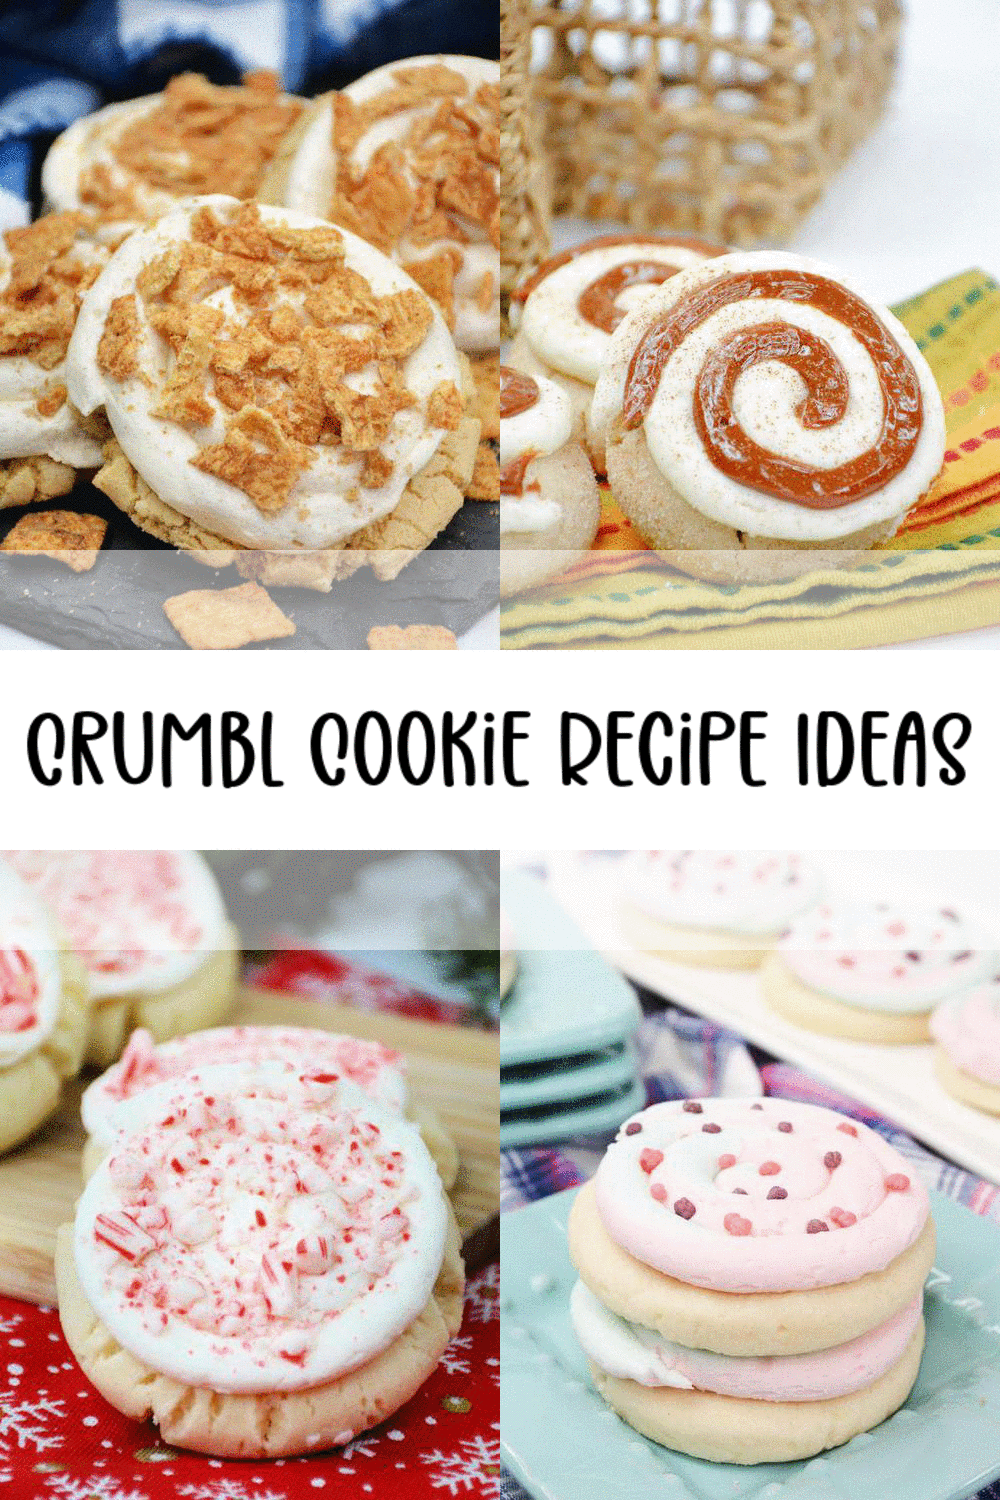 5 Crumbl Cookie Recipes - Best Crumbl Cookie Ideas